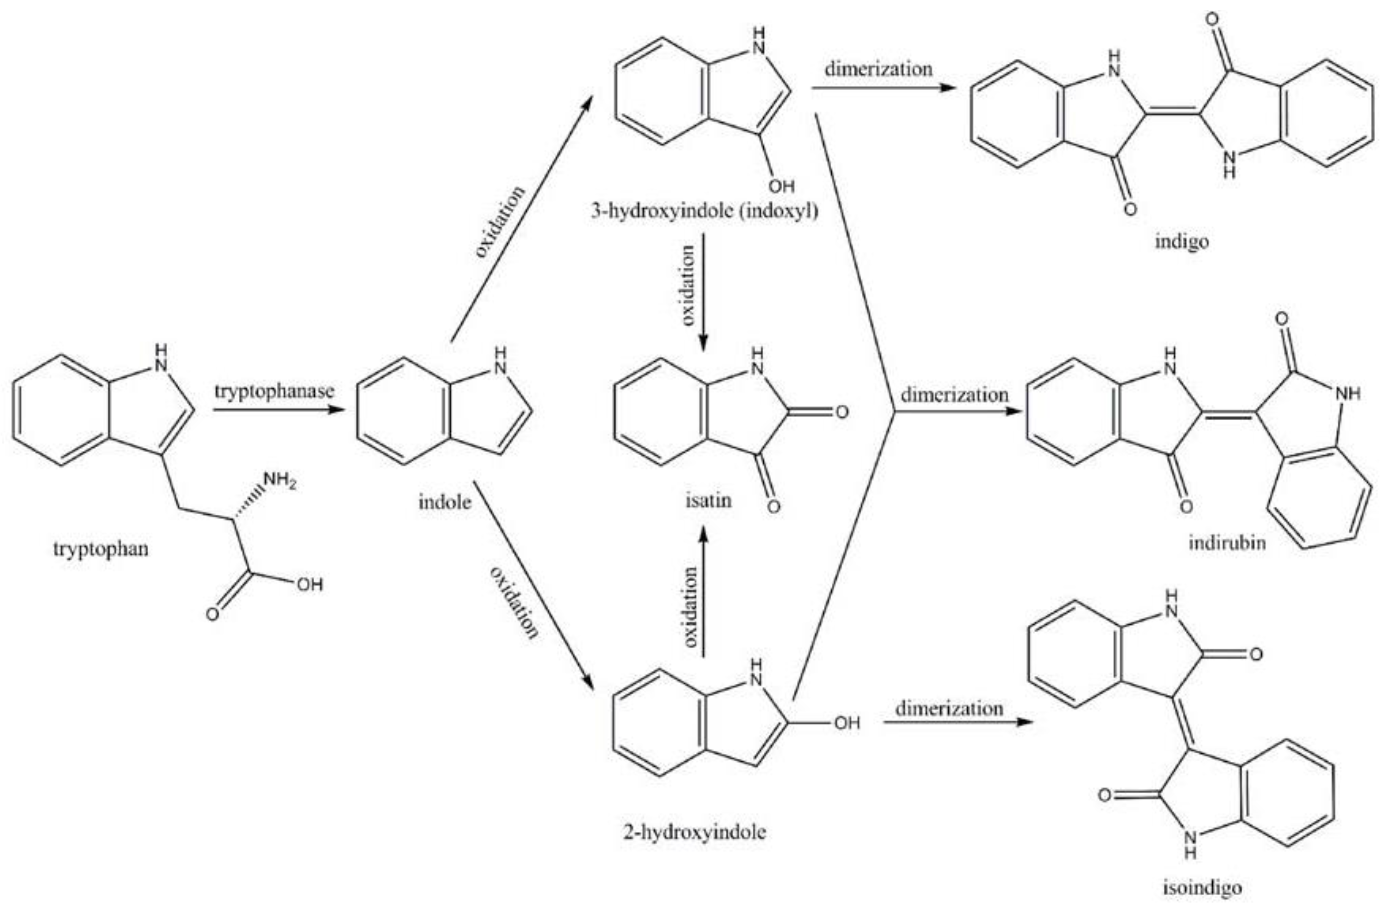 Pathway for converting tryptophan to indigoid compounds.png